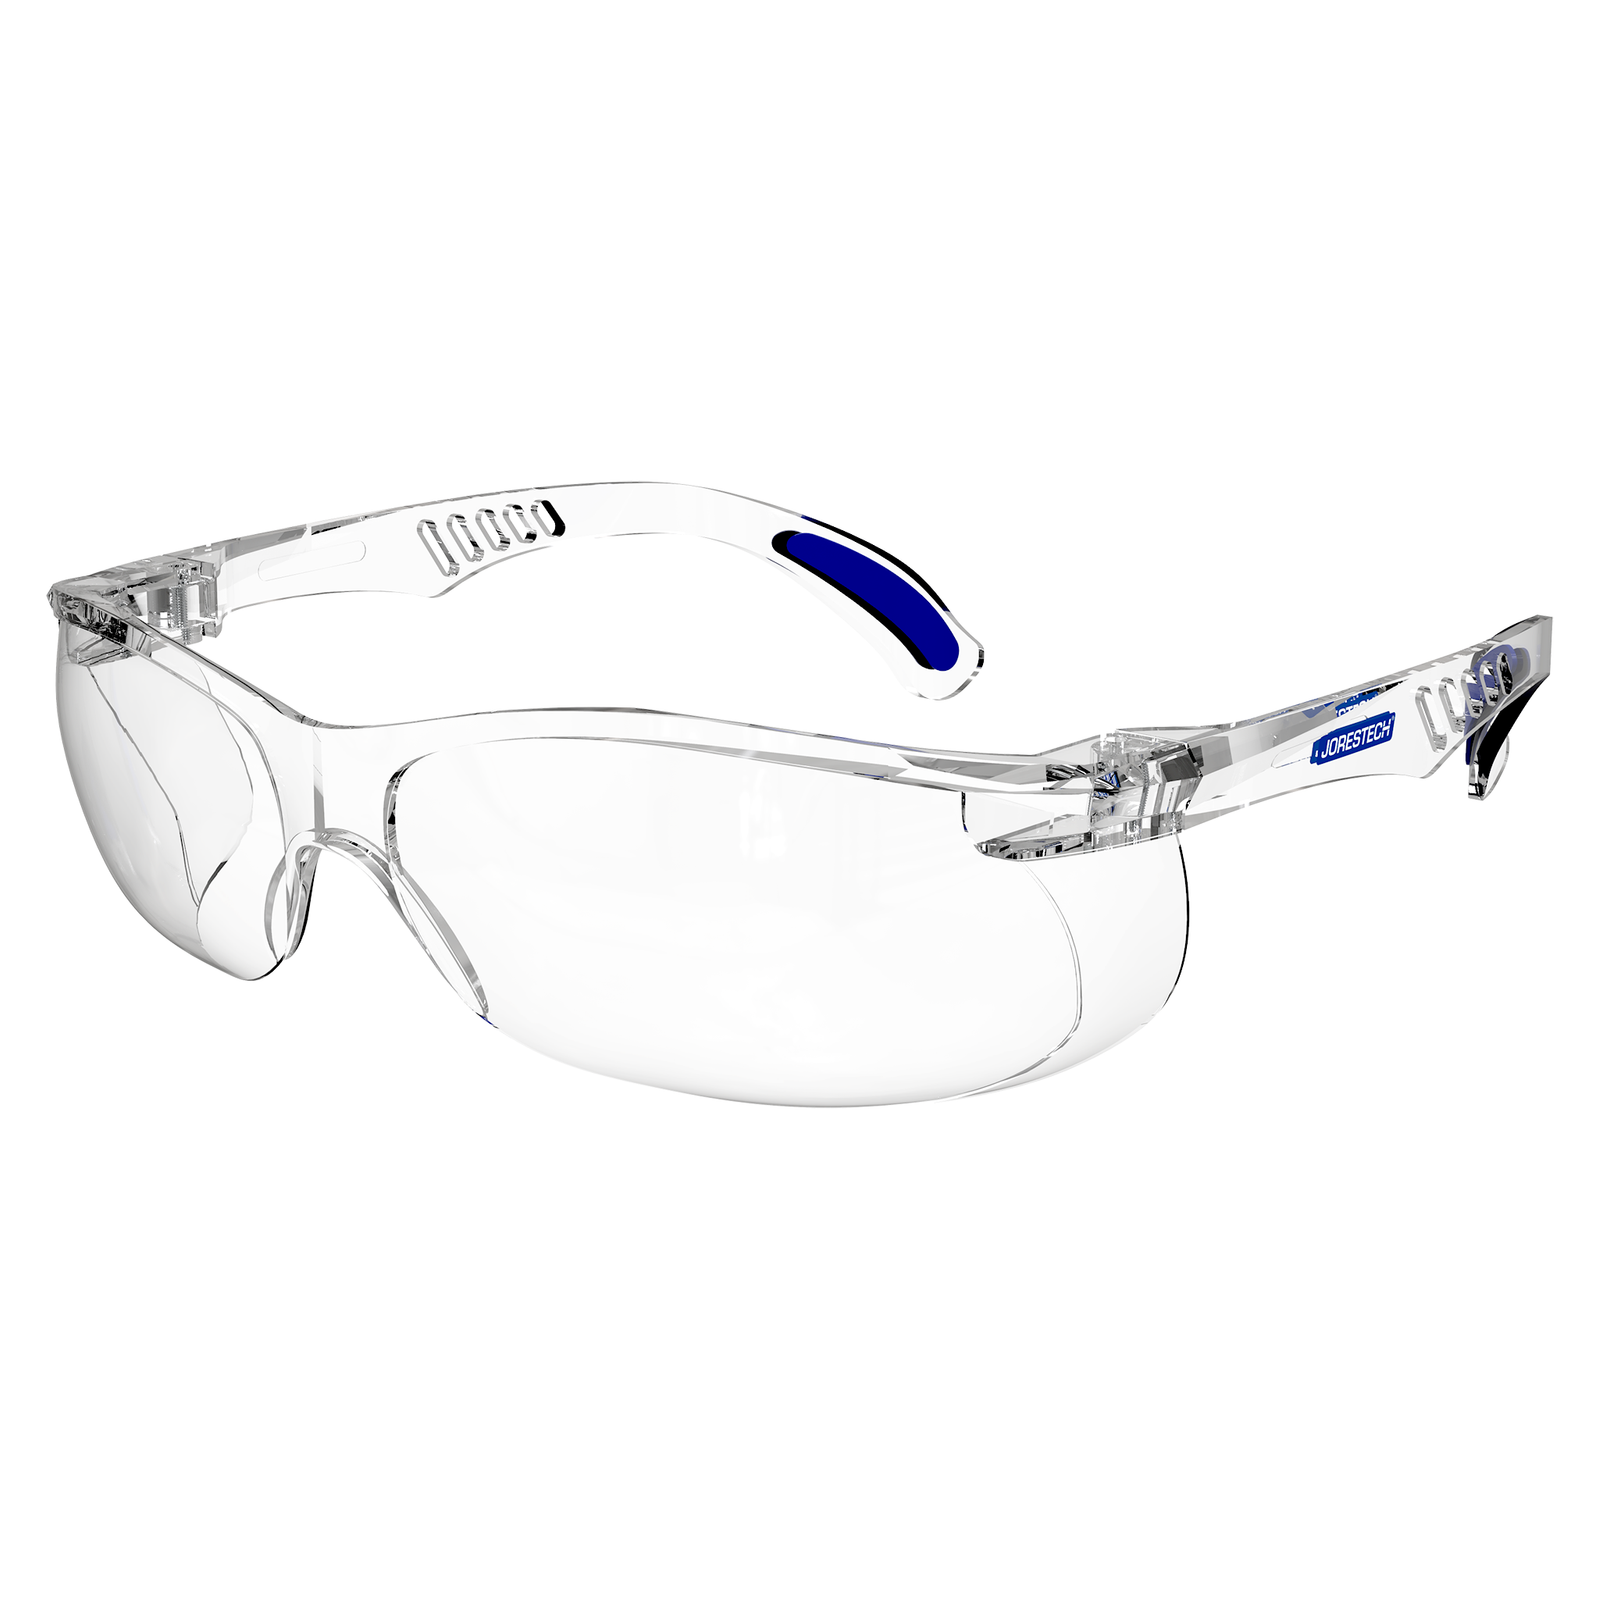 Diagonal view of the clear JORESTECH panoramic safety glass for high impact protection.  Temples of this ANSI compliant glasses have details in blue. 